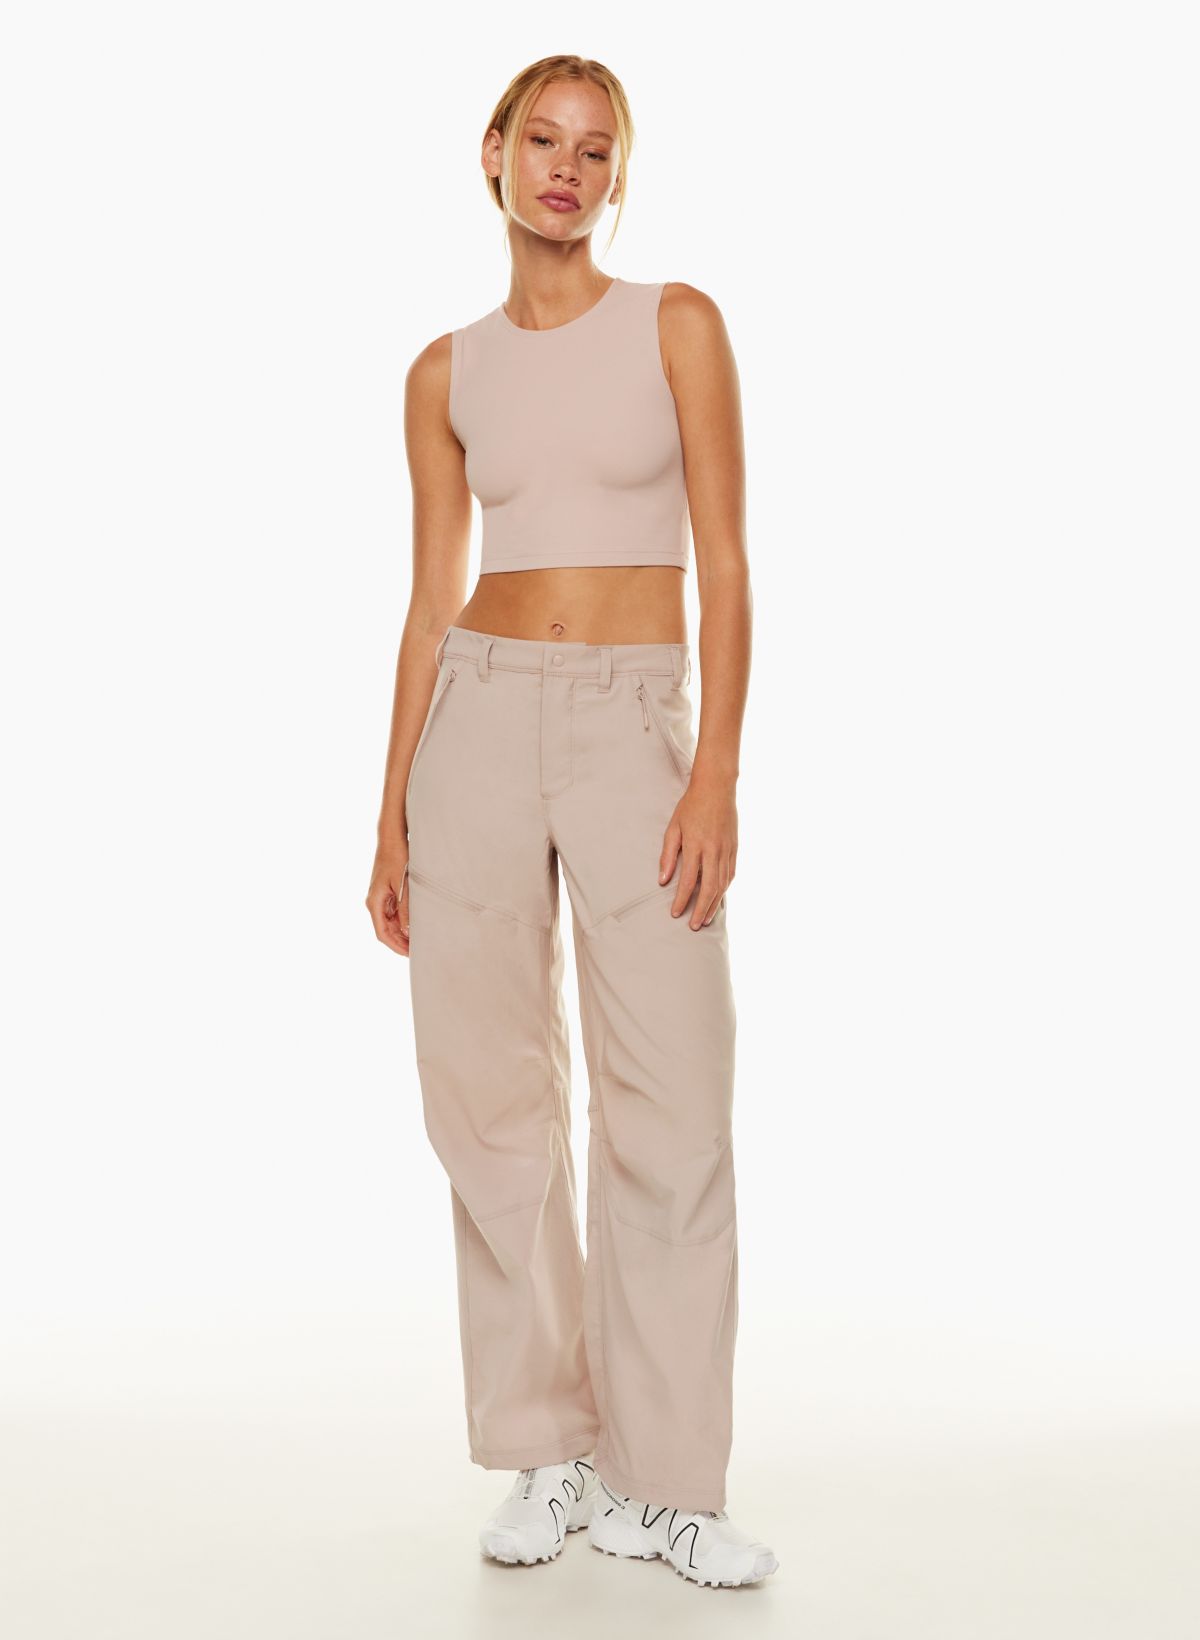 Women's Snow Pants for sale in Victory, New York